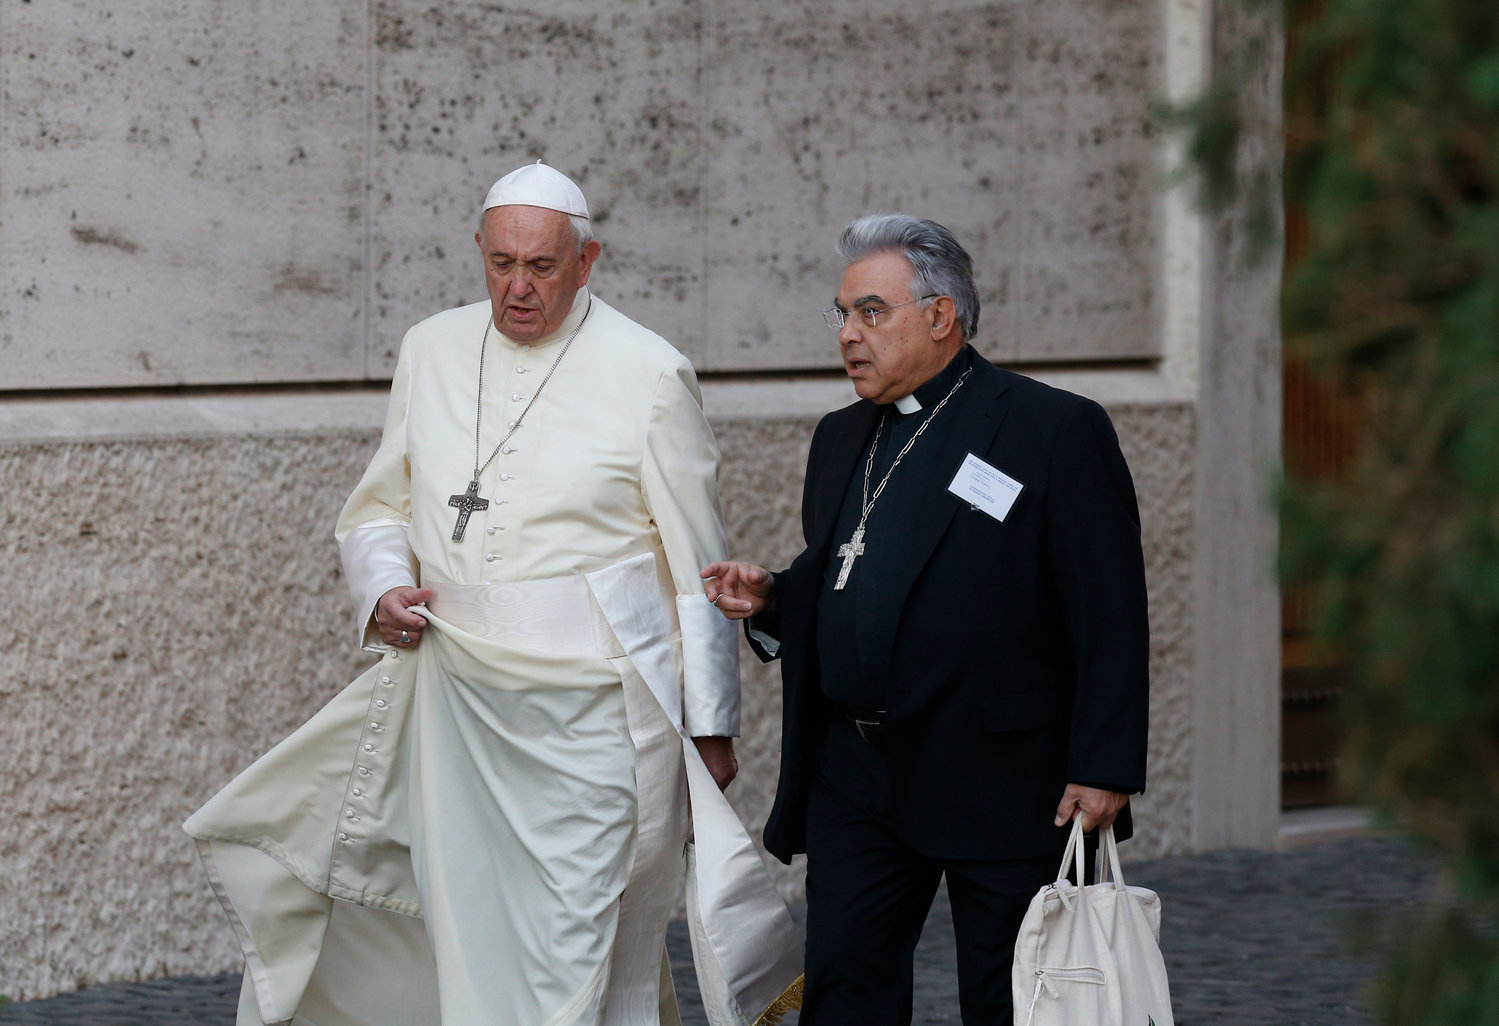 Pope Francis and Italian Bishop Marcello Semeraro of Albano arrive for a session of the Synod of Bishops for the Amazon at the Vatican Oct. 15, 2019.